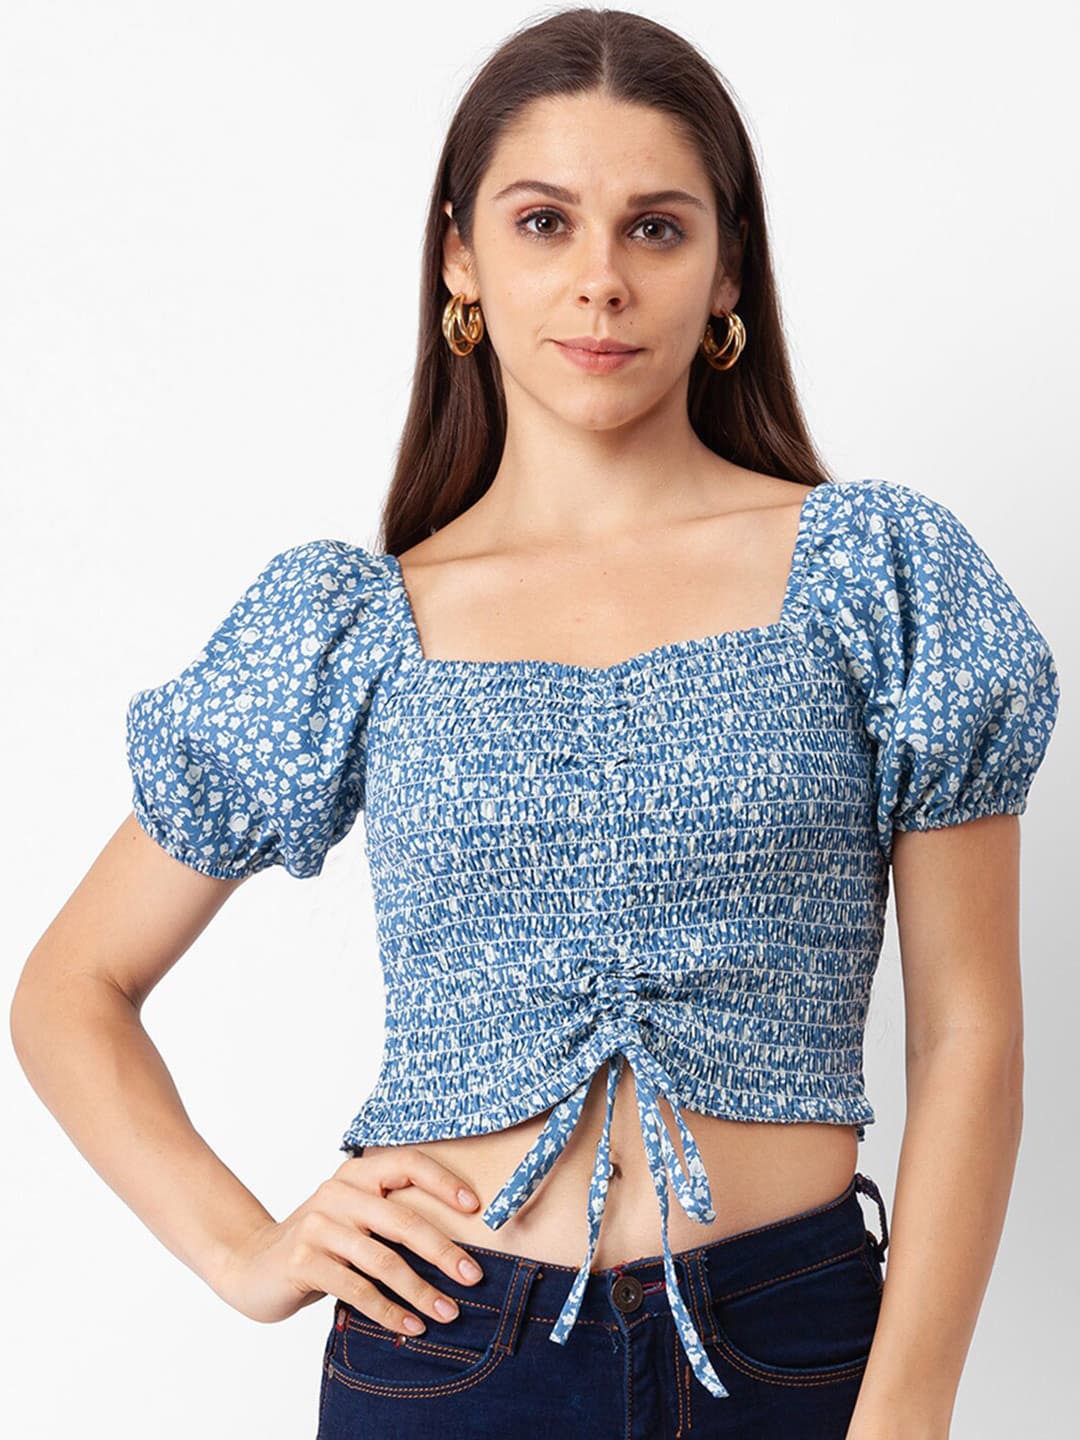 Globus Blue Floral Print Pure Cotton Crop Top Price in India